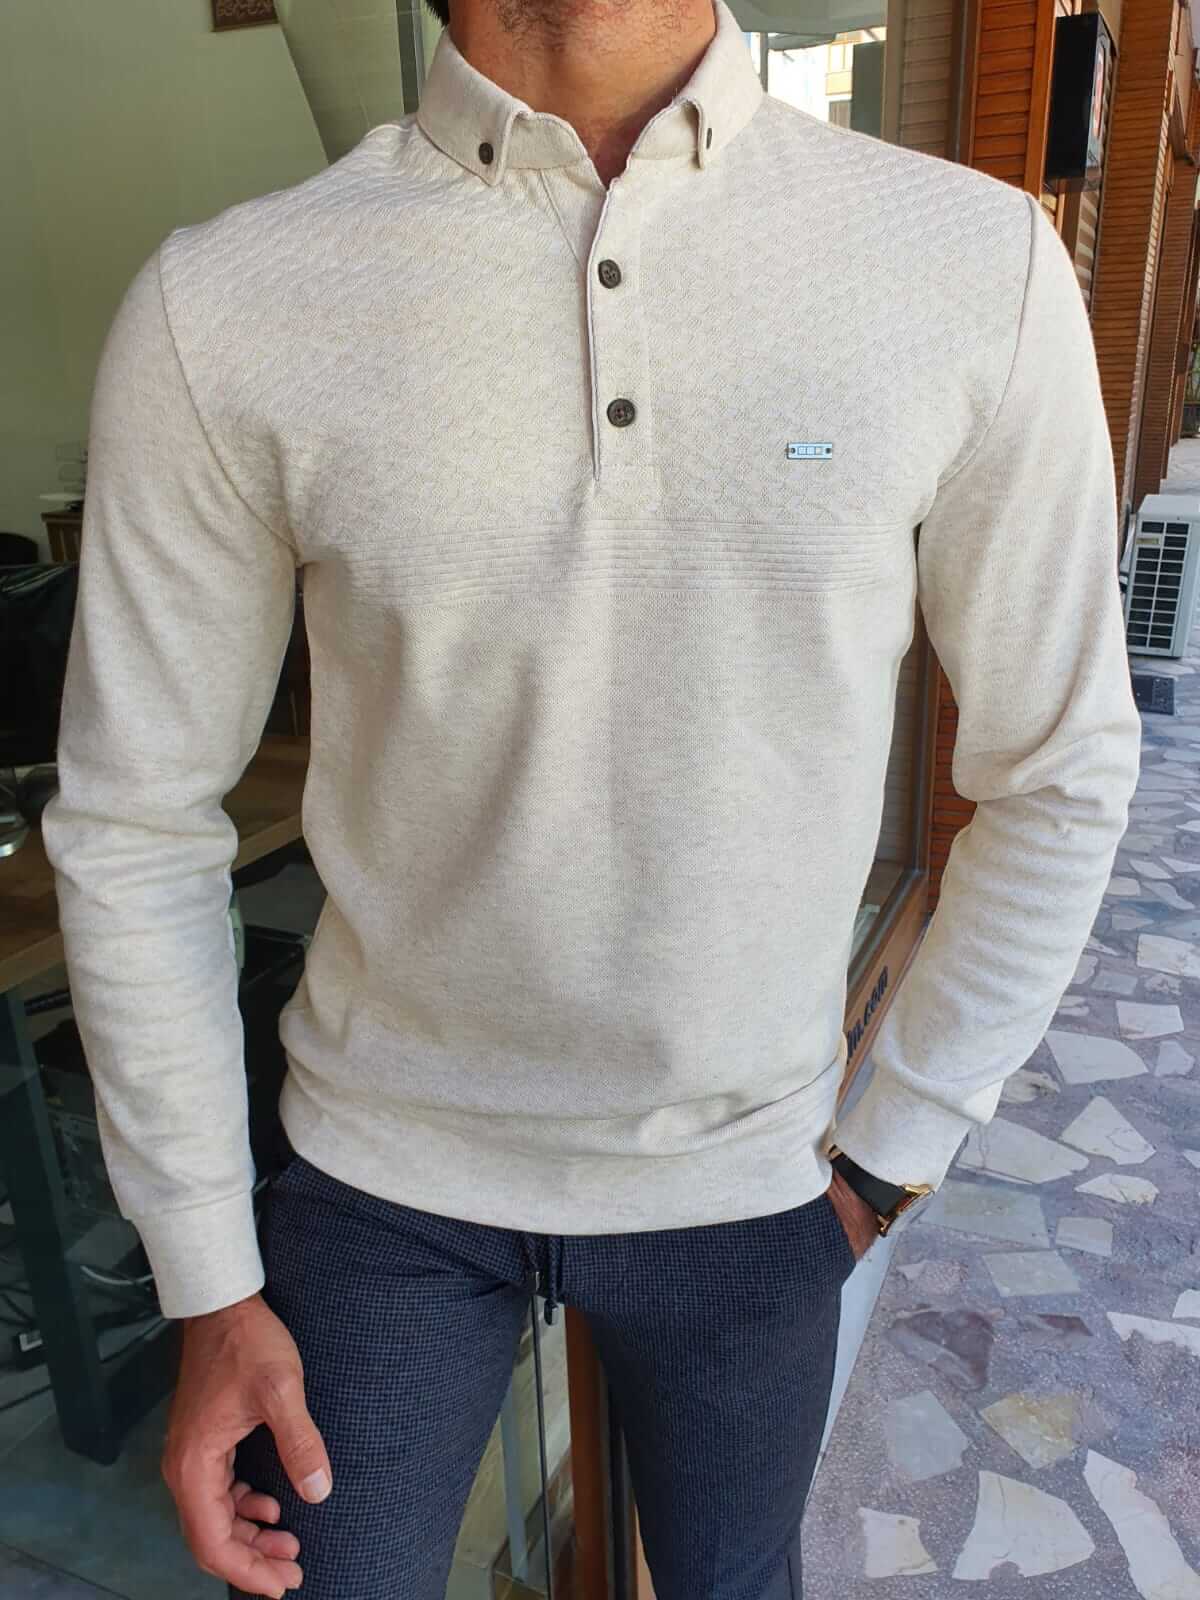 A beige longsleeve combed knitwear garment with a soft, textured surface.